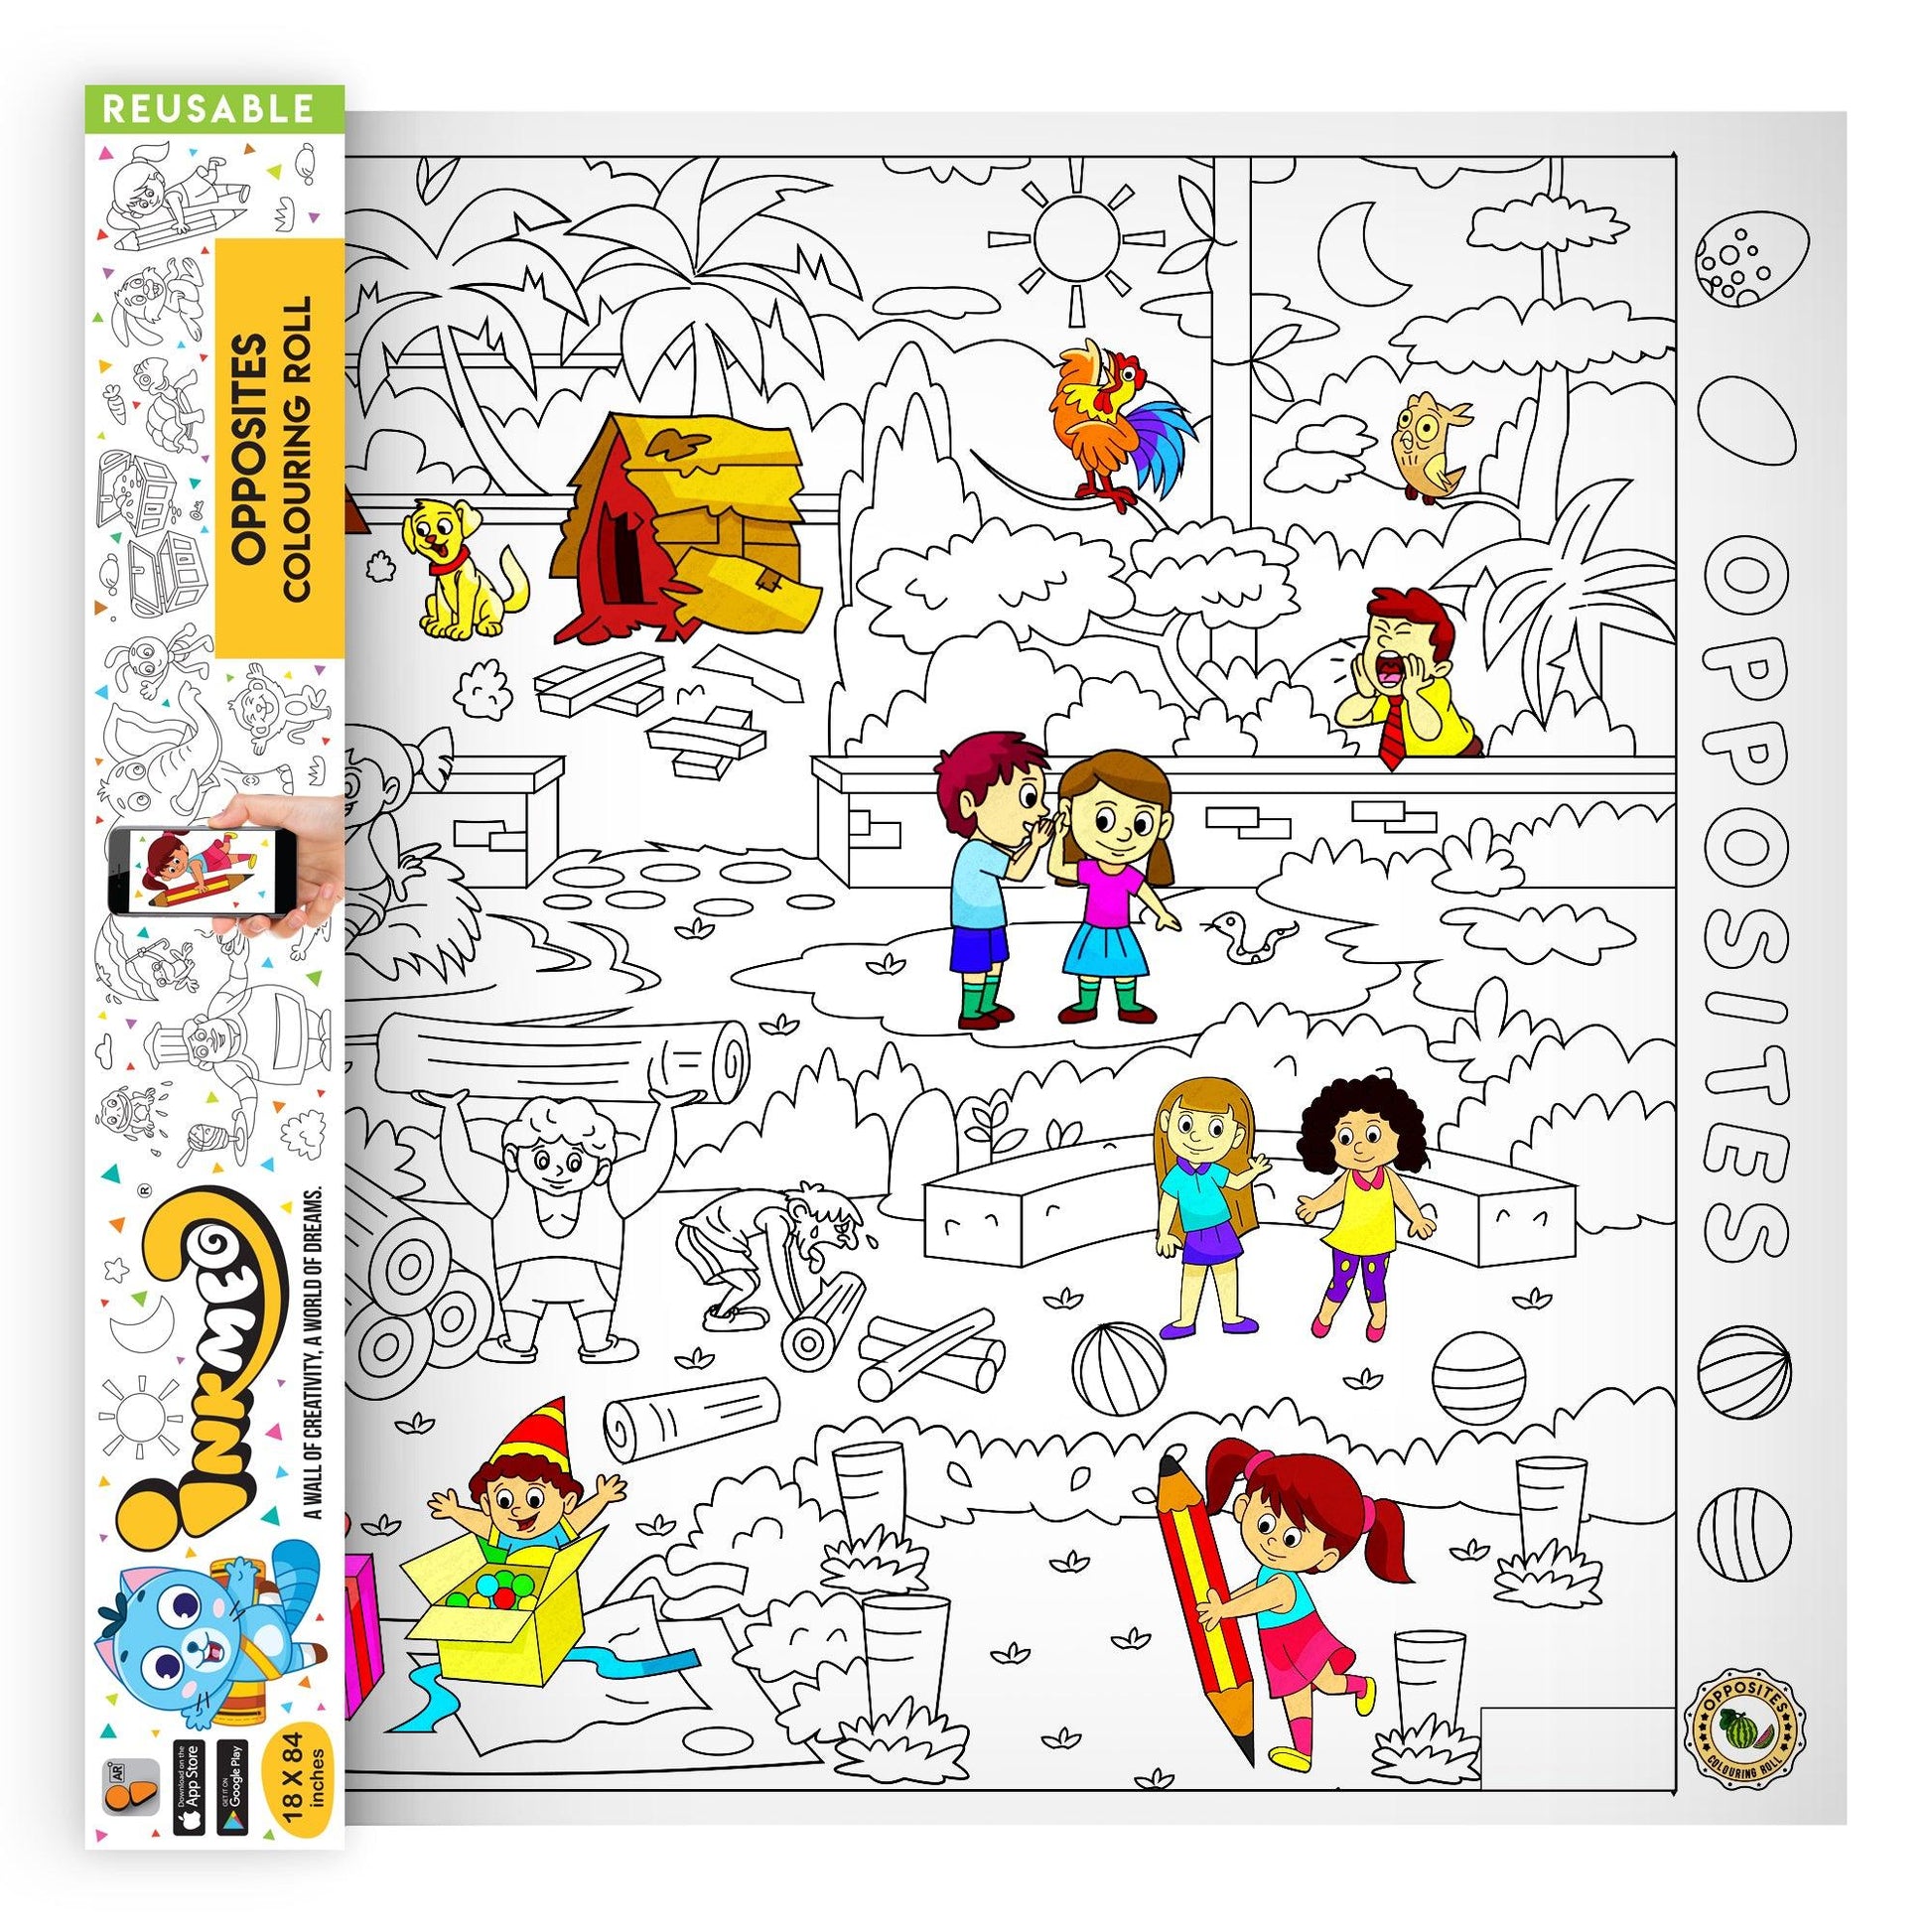 The image depicts a yellow box with a roll opened from inside it alongside a colourful picture.